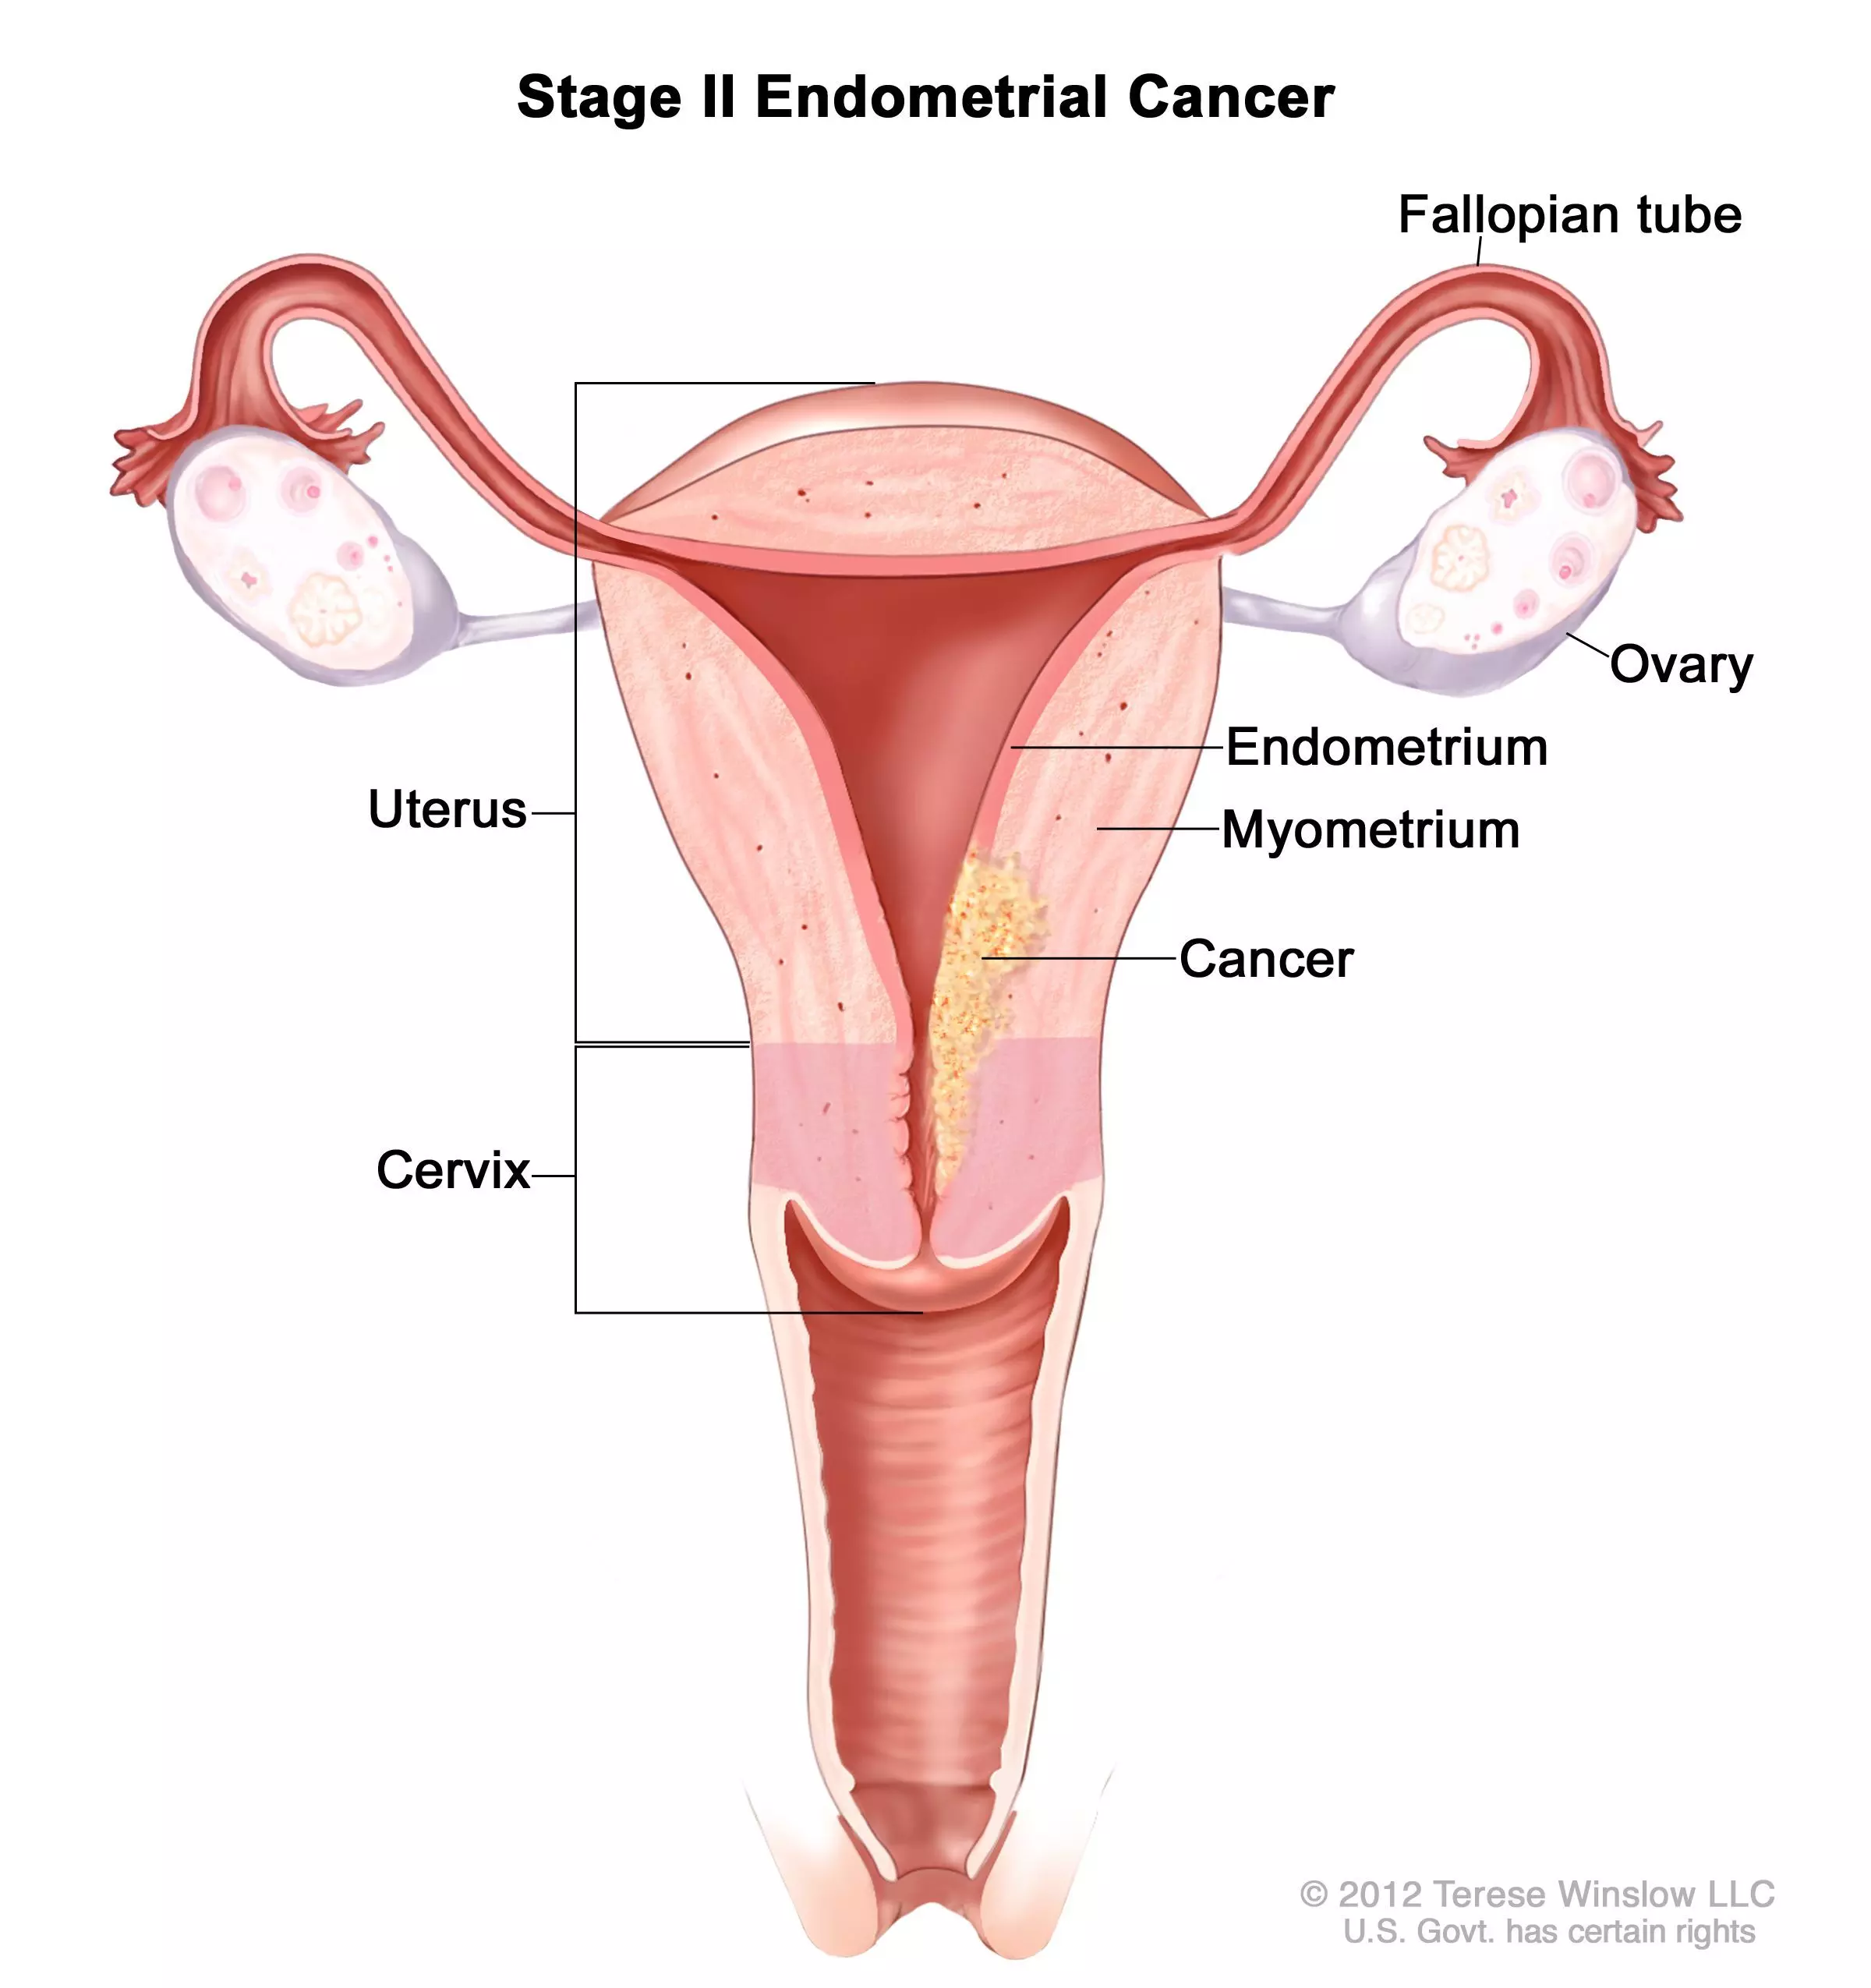 Is Hysteroscopy Safe for diagnosing Type 2 Endometrial Cancer?